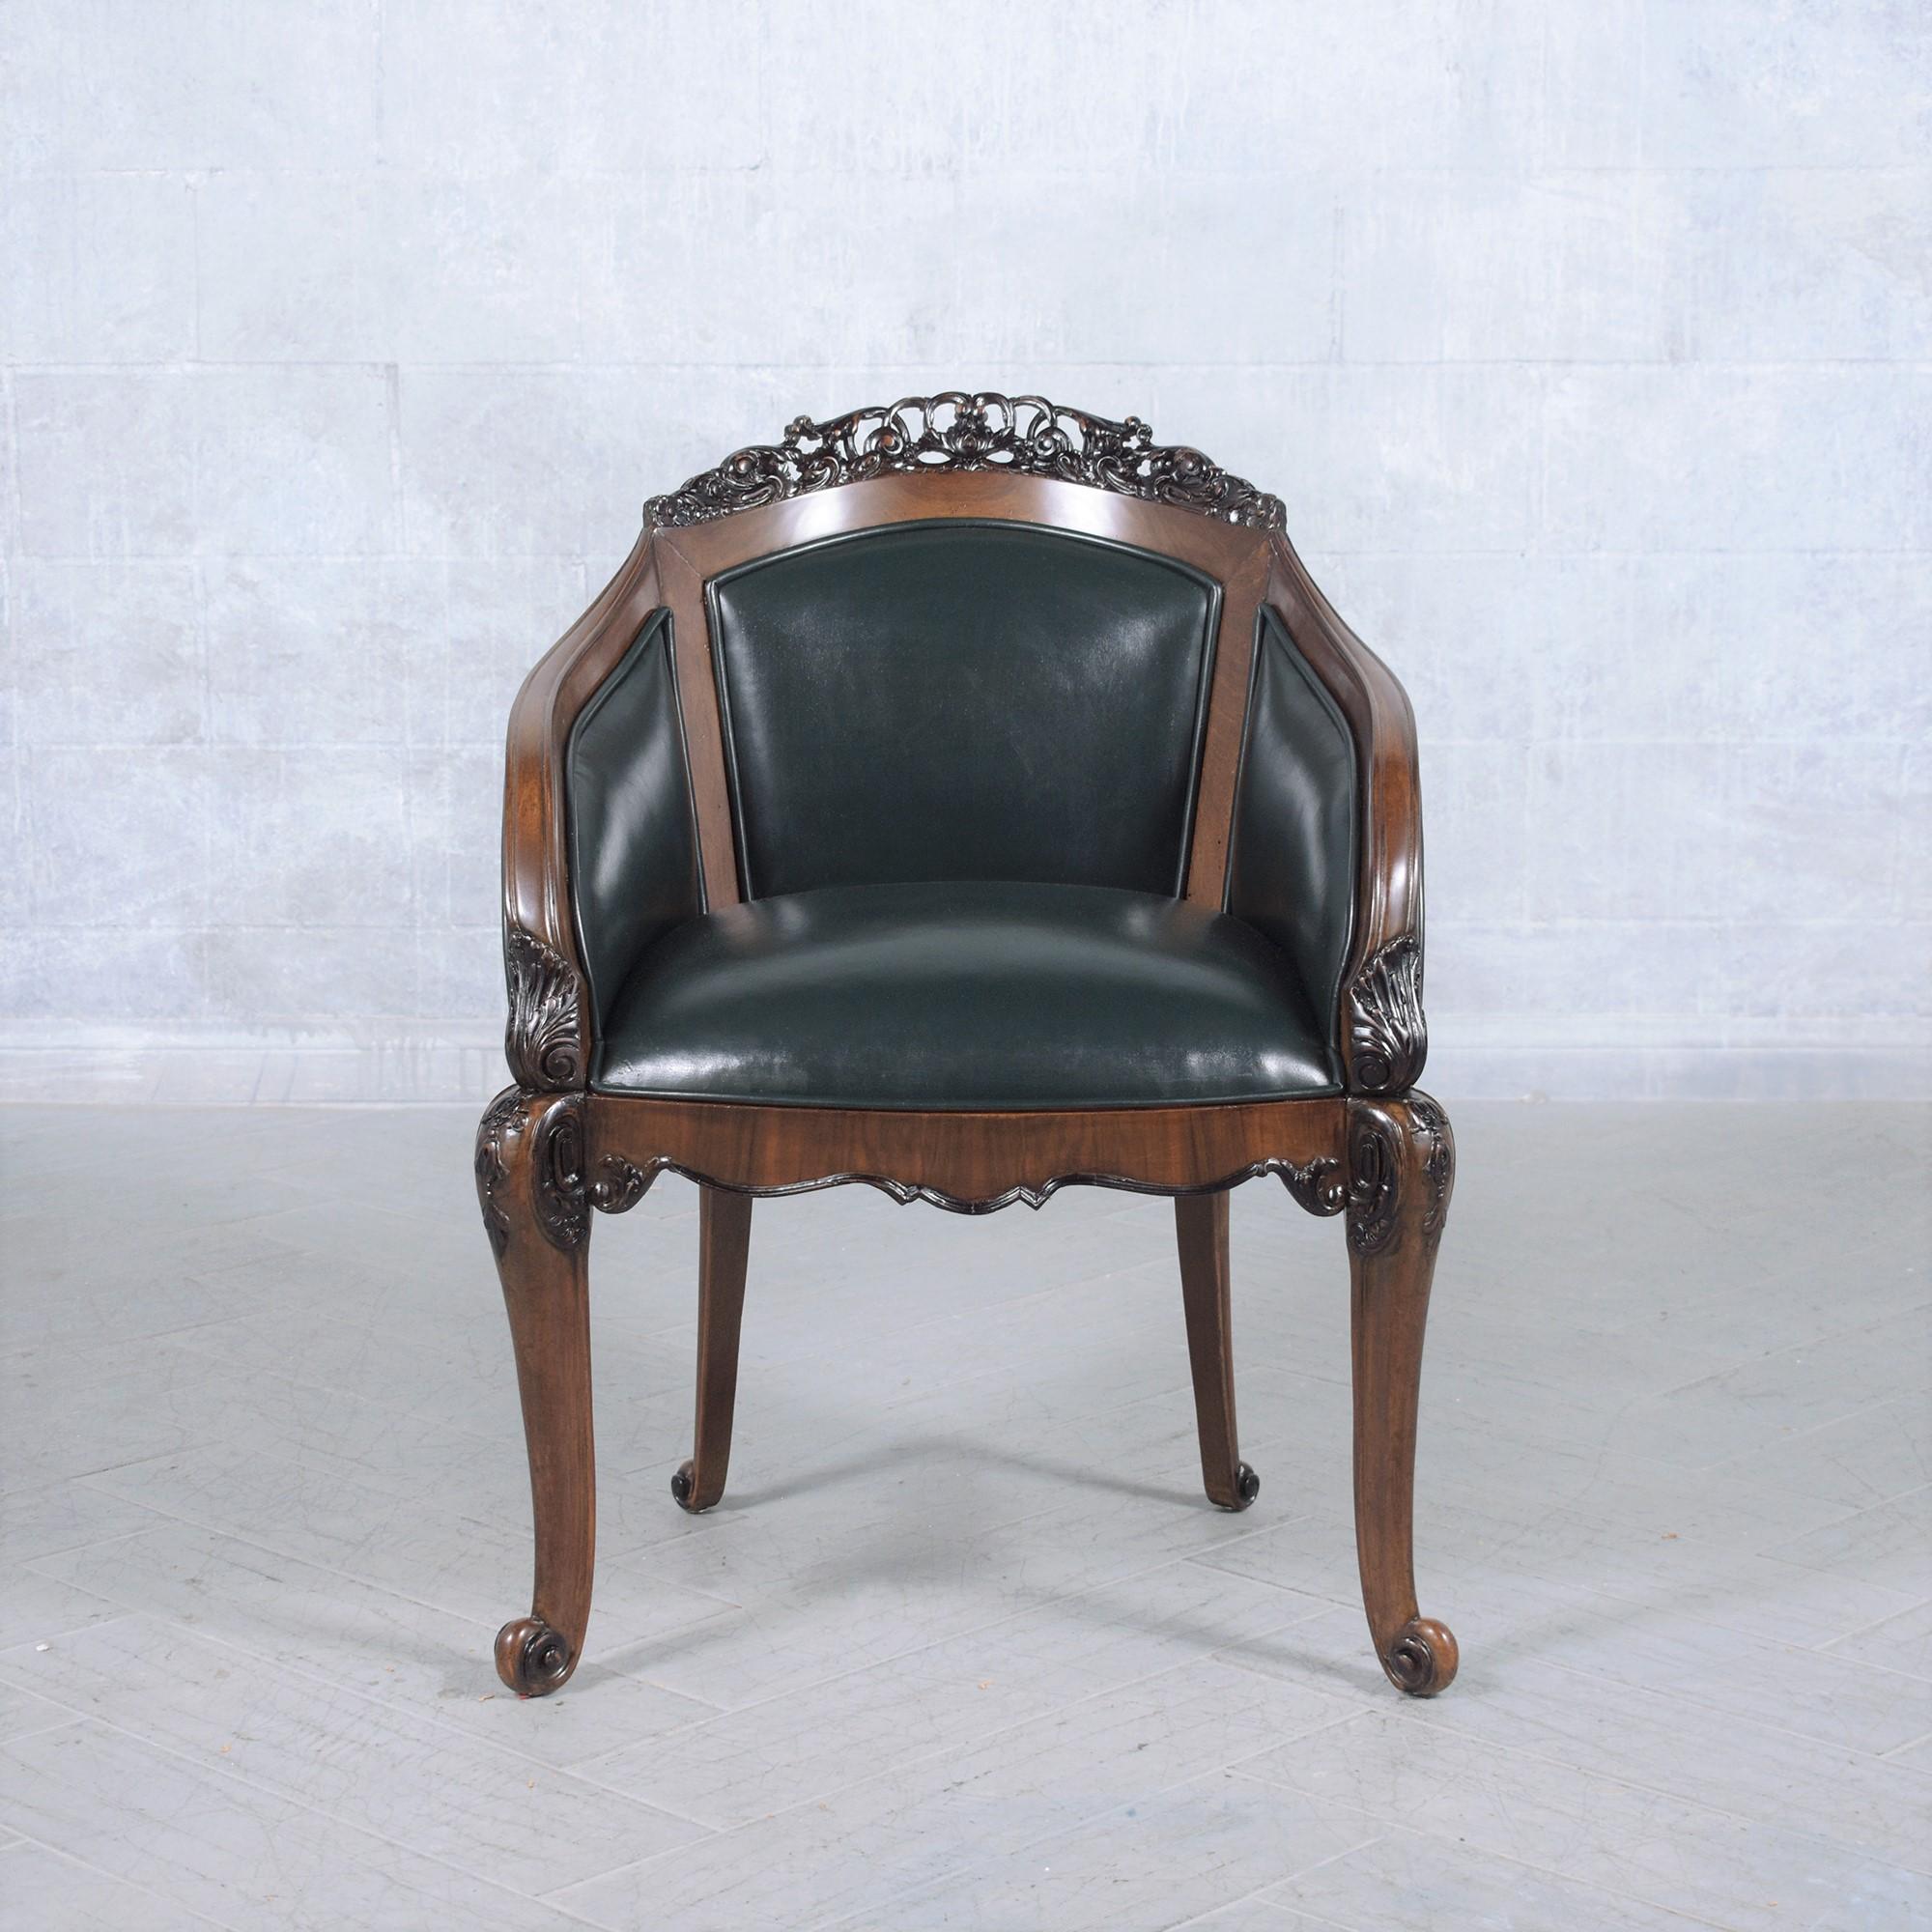 19th-Century English Chinoiserie Bergères: Restored Elegance in Green Leather For Sale 4